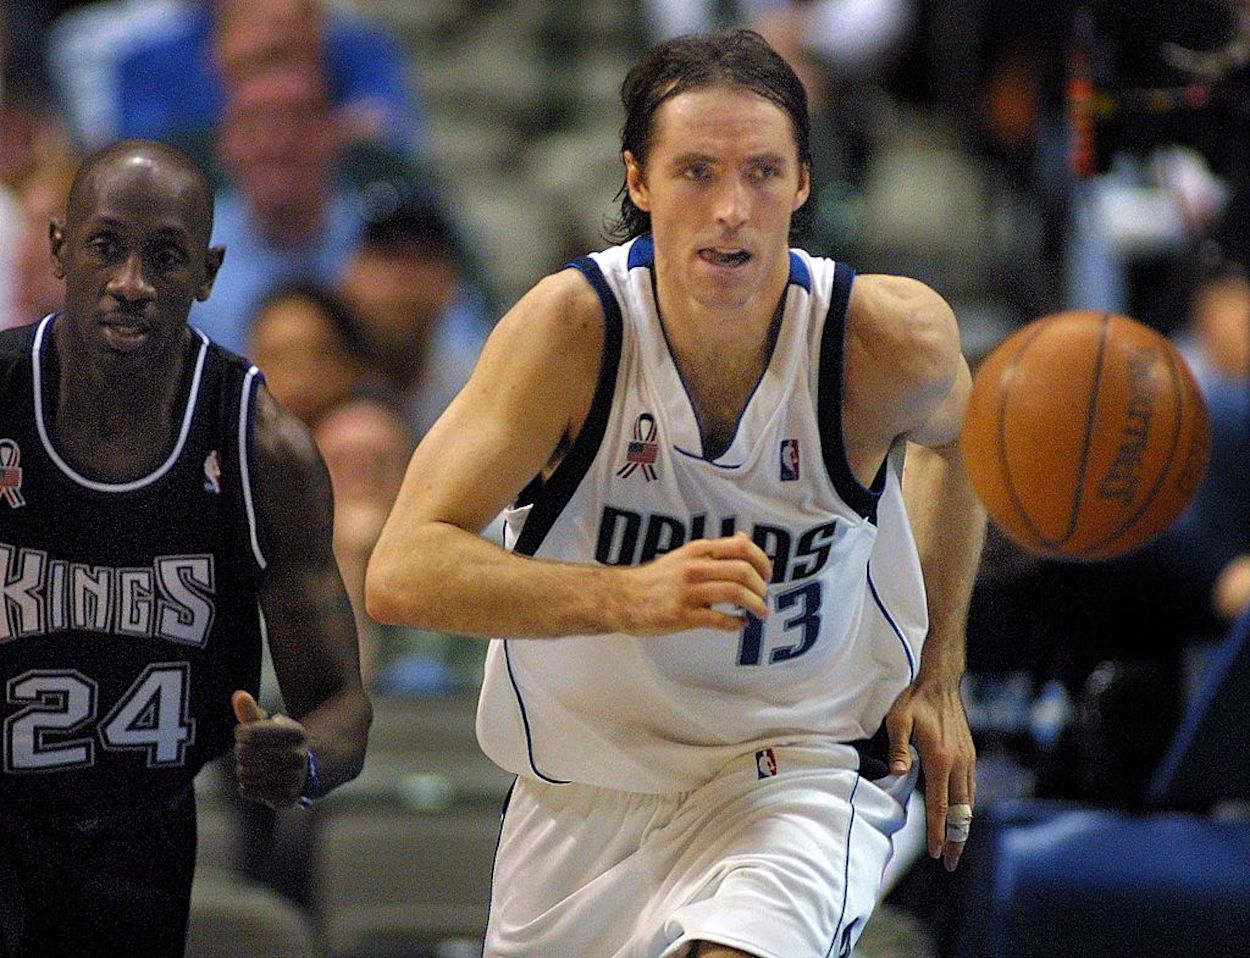 Steve Nash dribbles the ball during his time with the Dallas Mavericks.